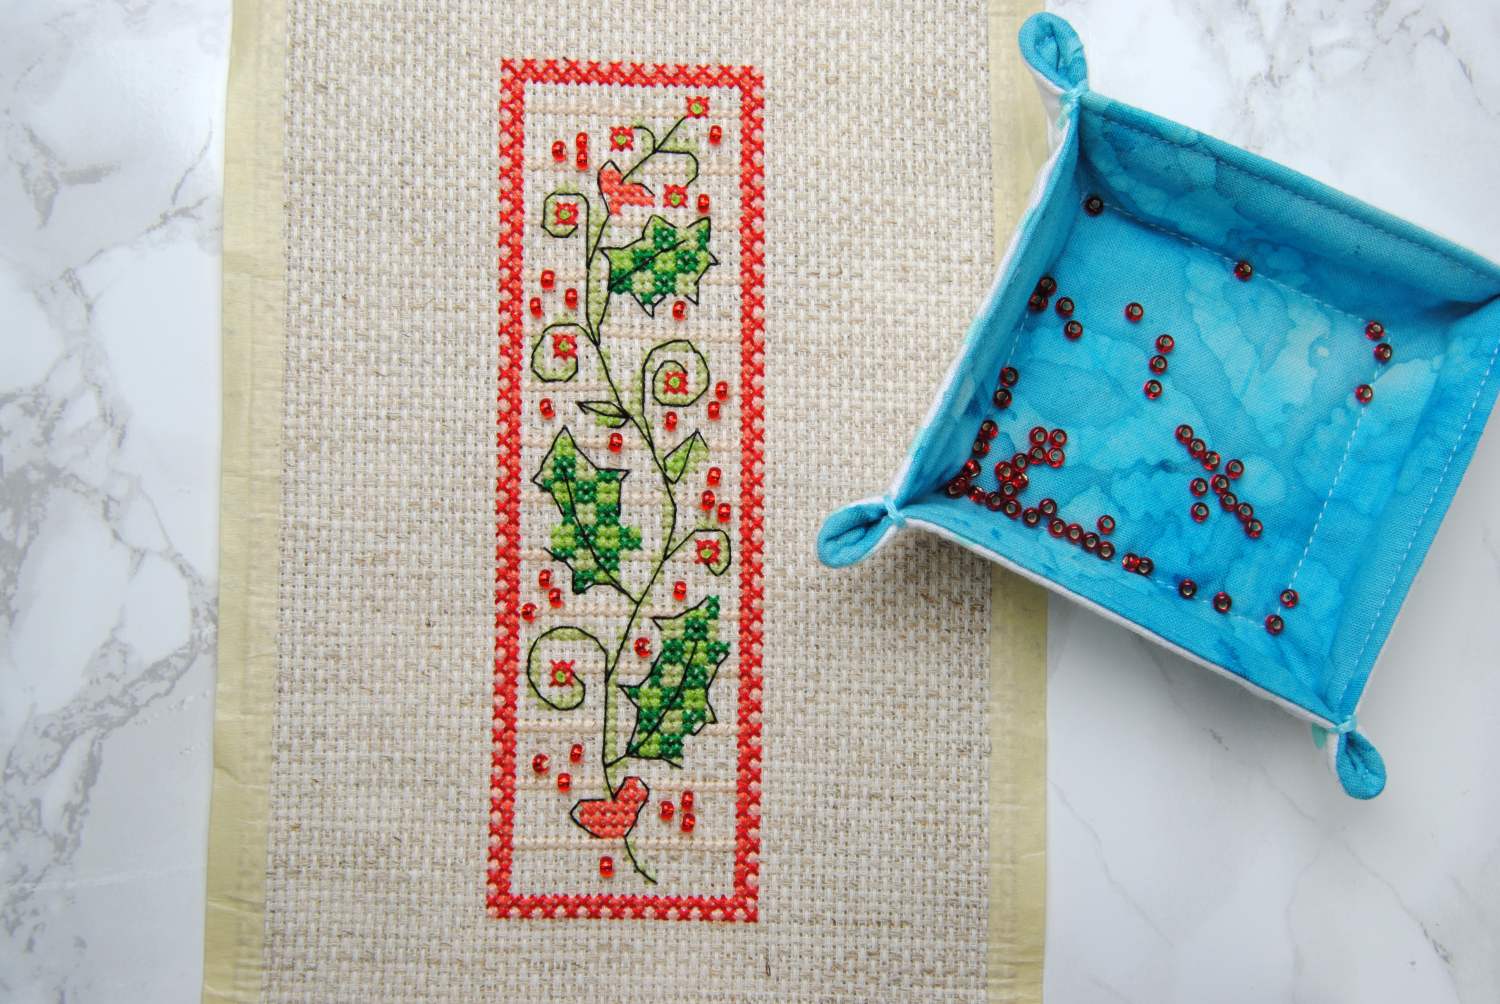 Beading kits for beginners - buy bead embroider with worldwide delivery, Handicraft shop